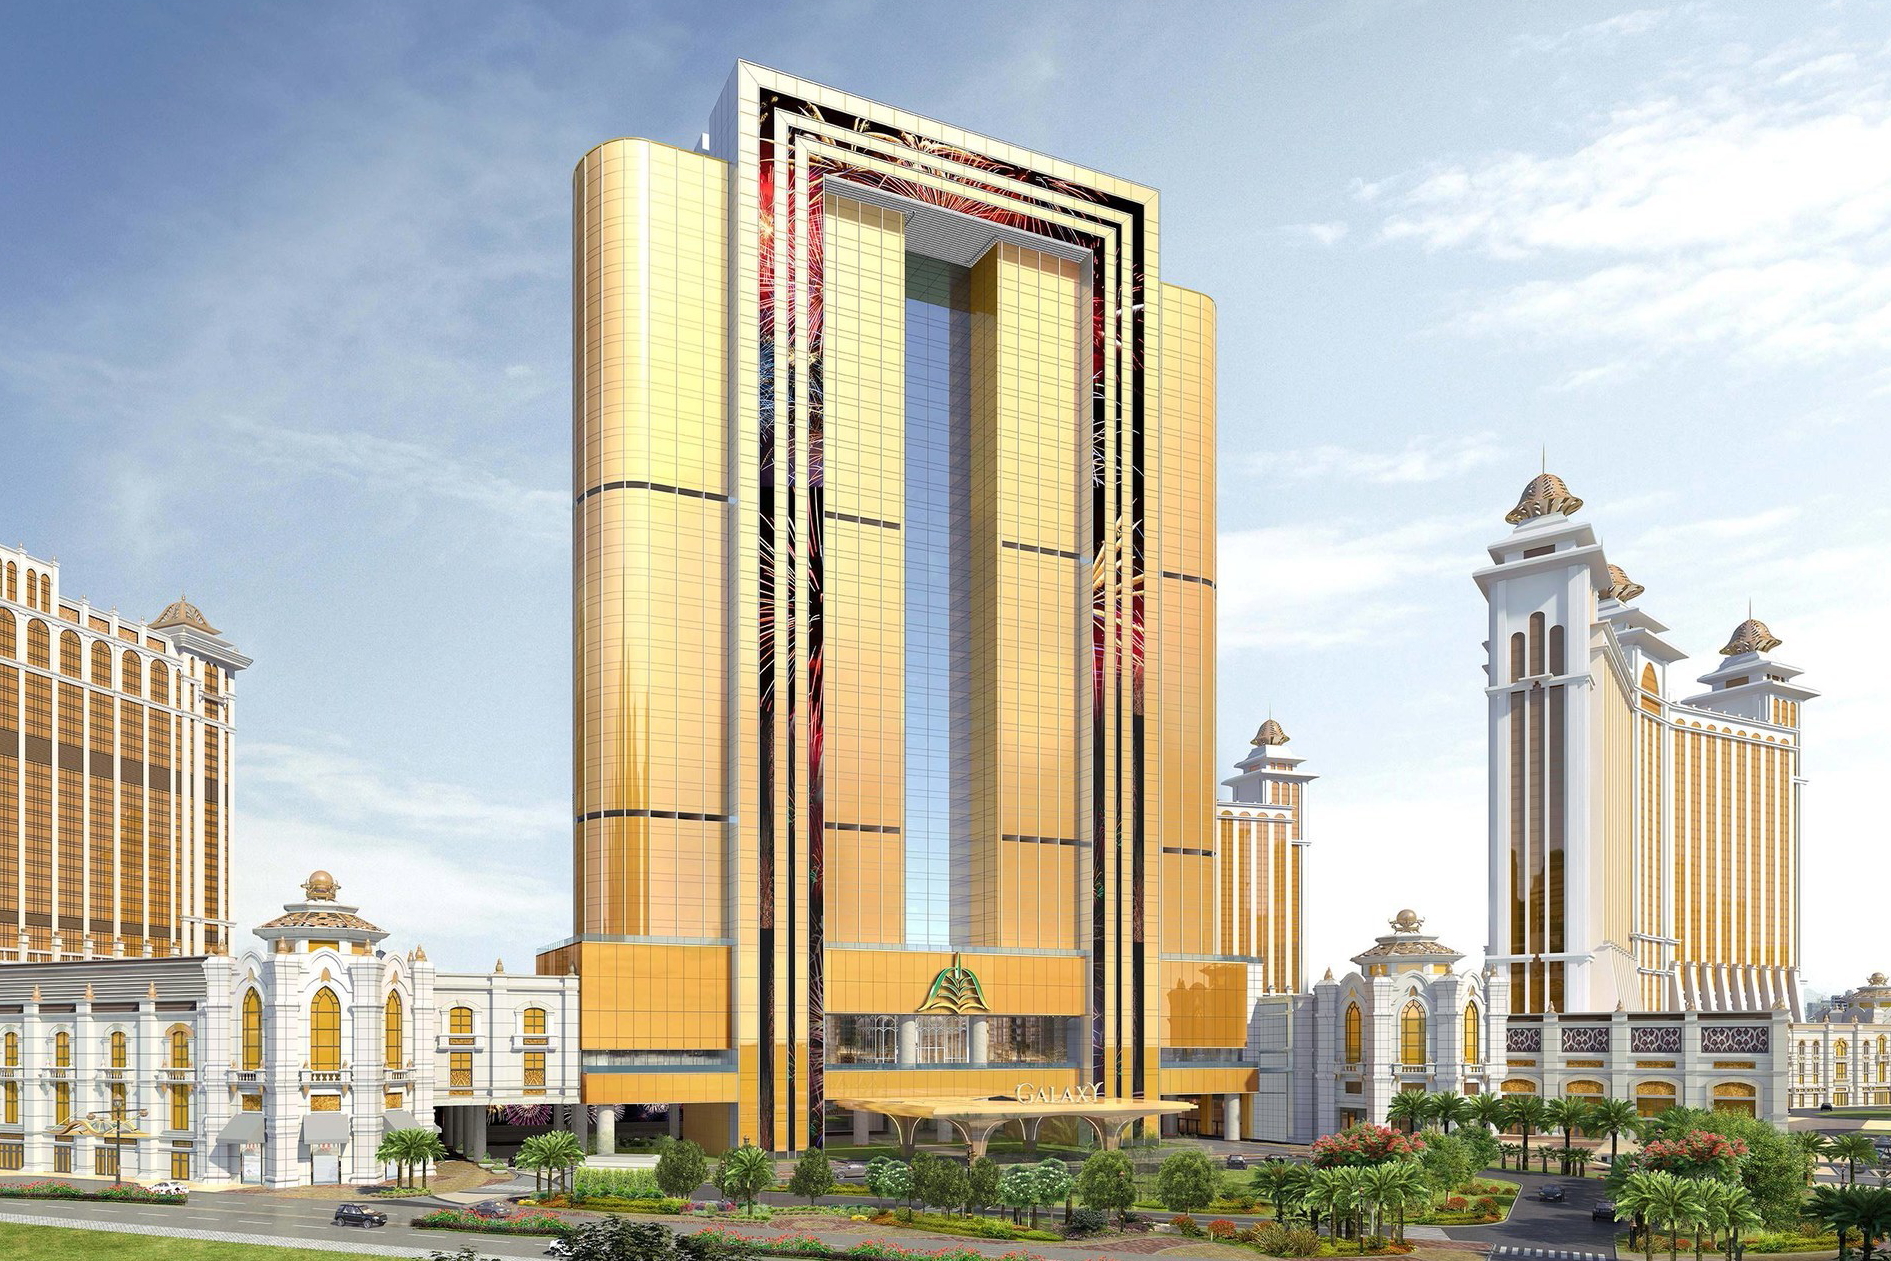 Scheduled to open the second half of 2021, the 450-suite Raffles at Galaxy Macau will be housed in a stunning architectural landmark featuring a glass airbridge connecting the two towers on every floor. Click to enlarge.